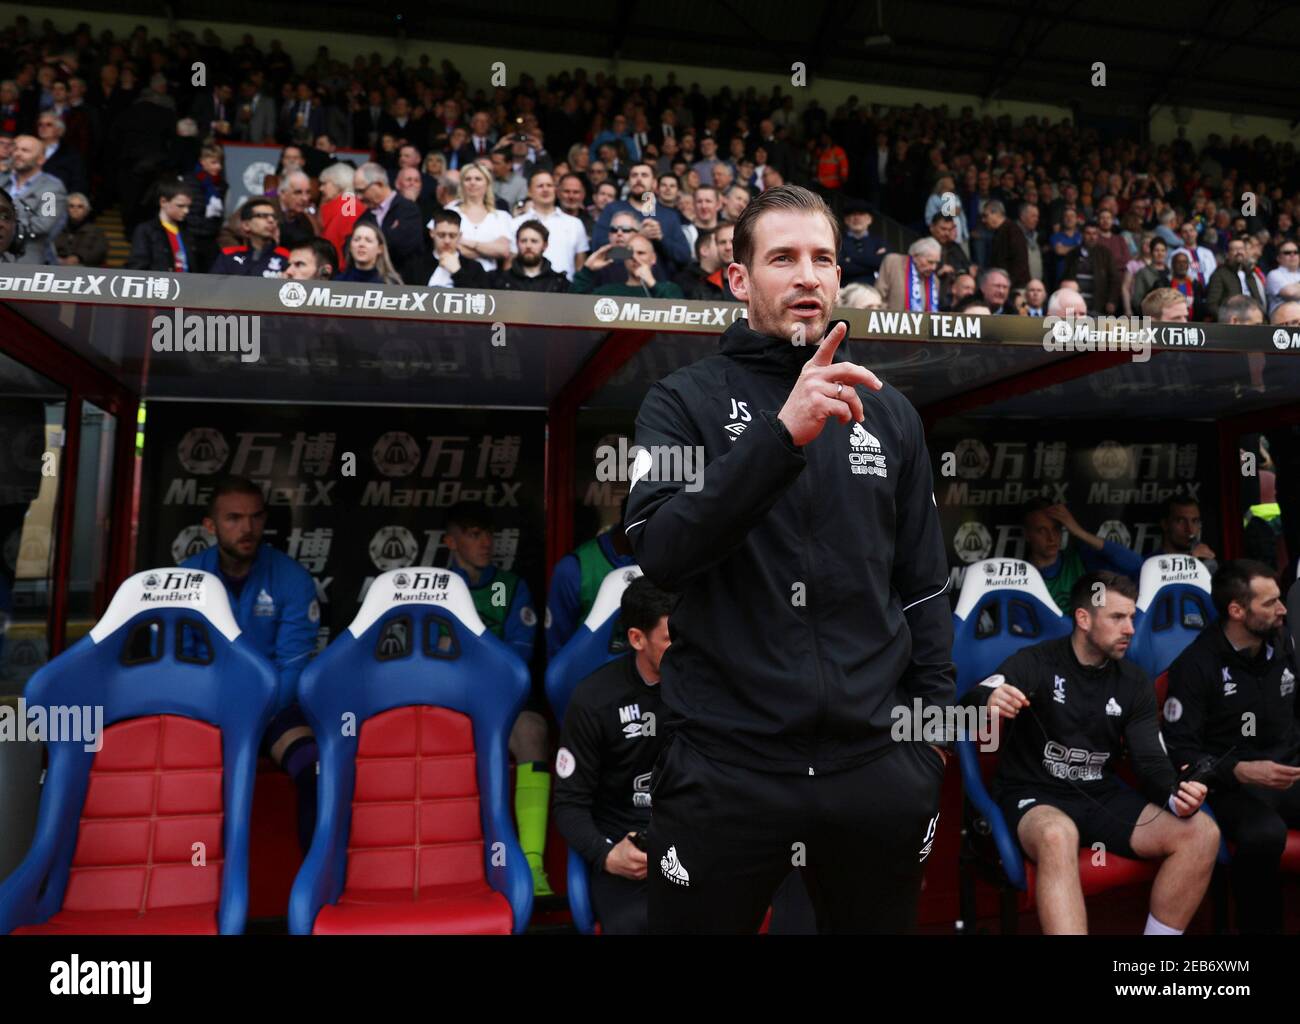 Soccer Football - Premier League - Crystal Palace v Huddersfield Town - Selhurst Park, London, Britain - March 30, 2019  Huddersfield Town manager Jan Siewert before the match    REUTERS/Hannah McKay  EDITORIAL USE ONLY. No use with unauthorized audio, video, data, fixture lists, club/league logos or 'live' services. Online in-match use limited to 75 images, no video emulation. No use in betting, games or single club/league/player publications.  Please contact your account representative for further details. Stock Photo